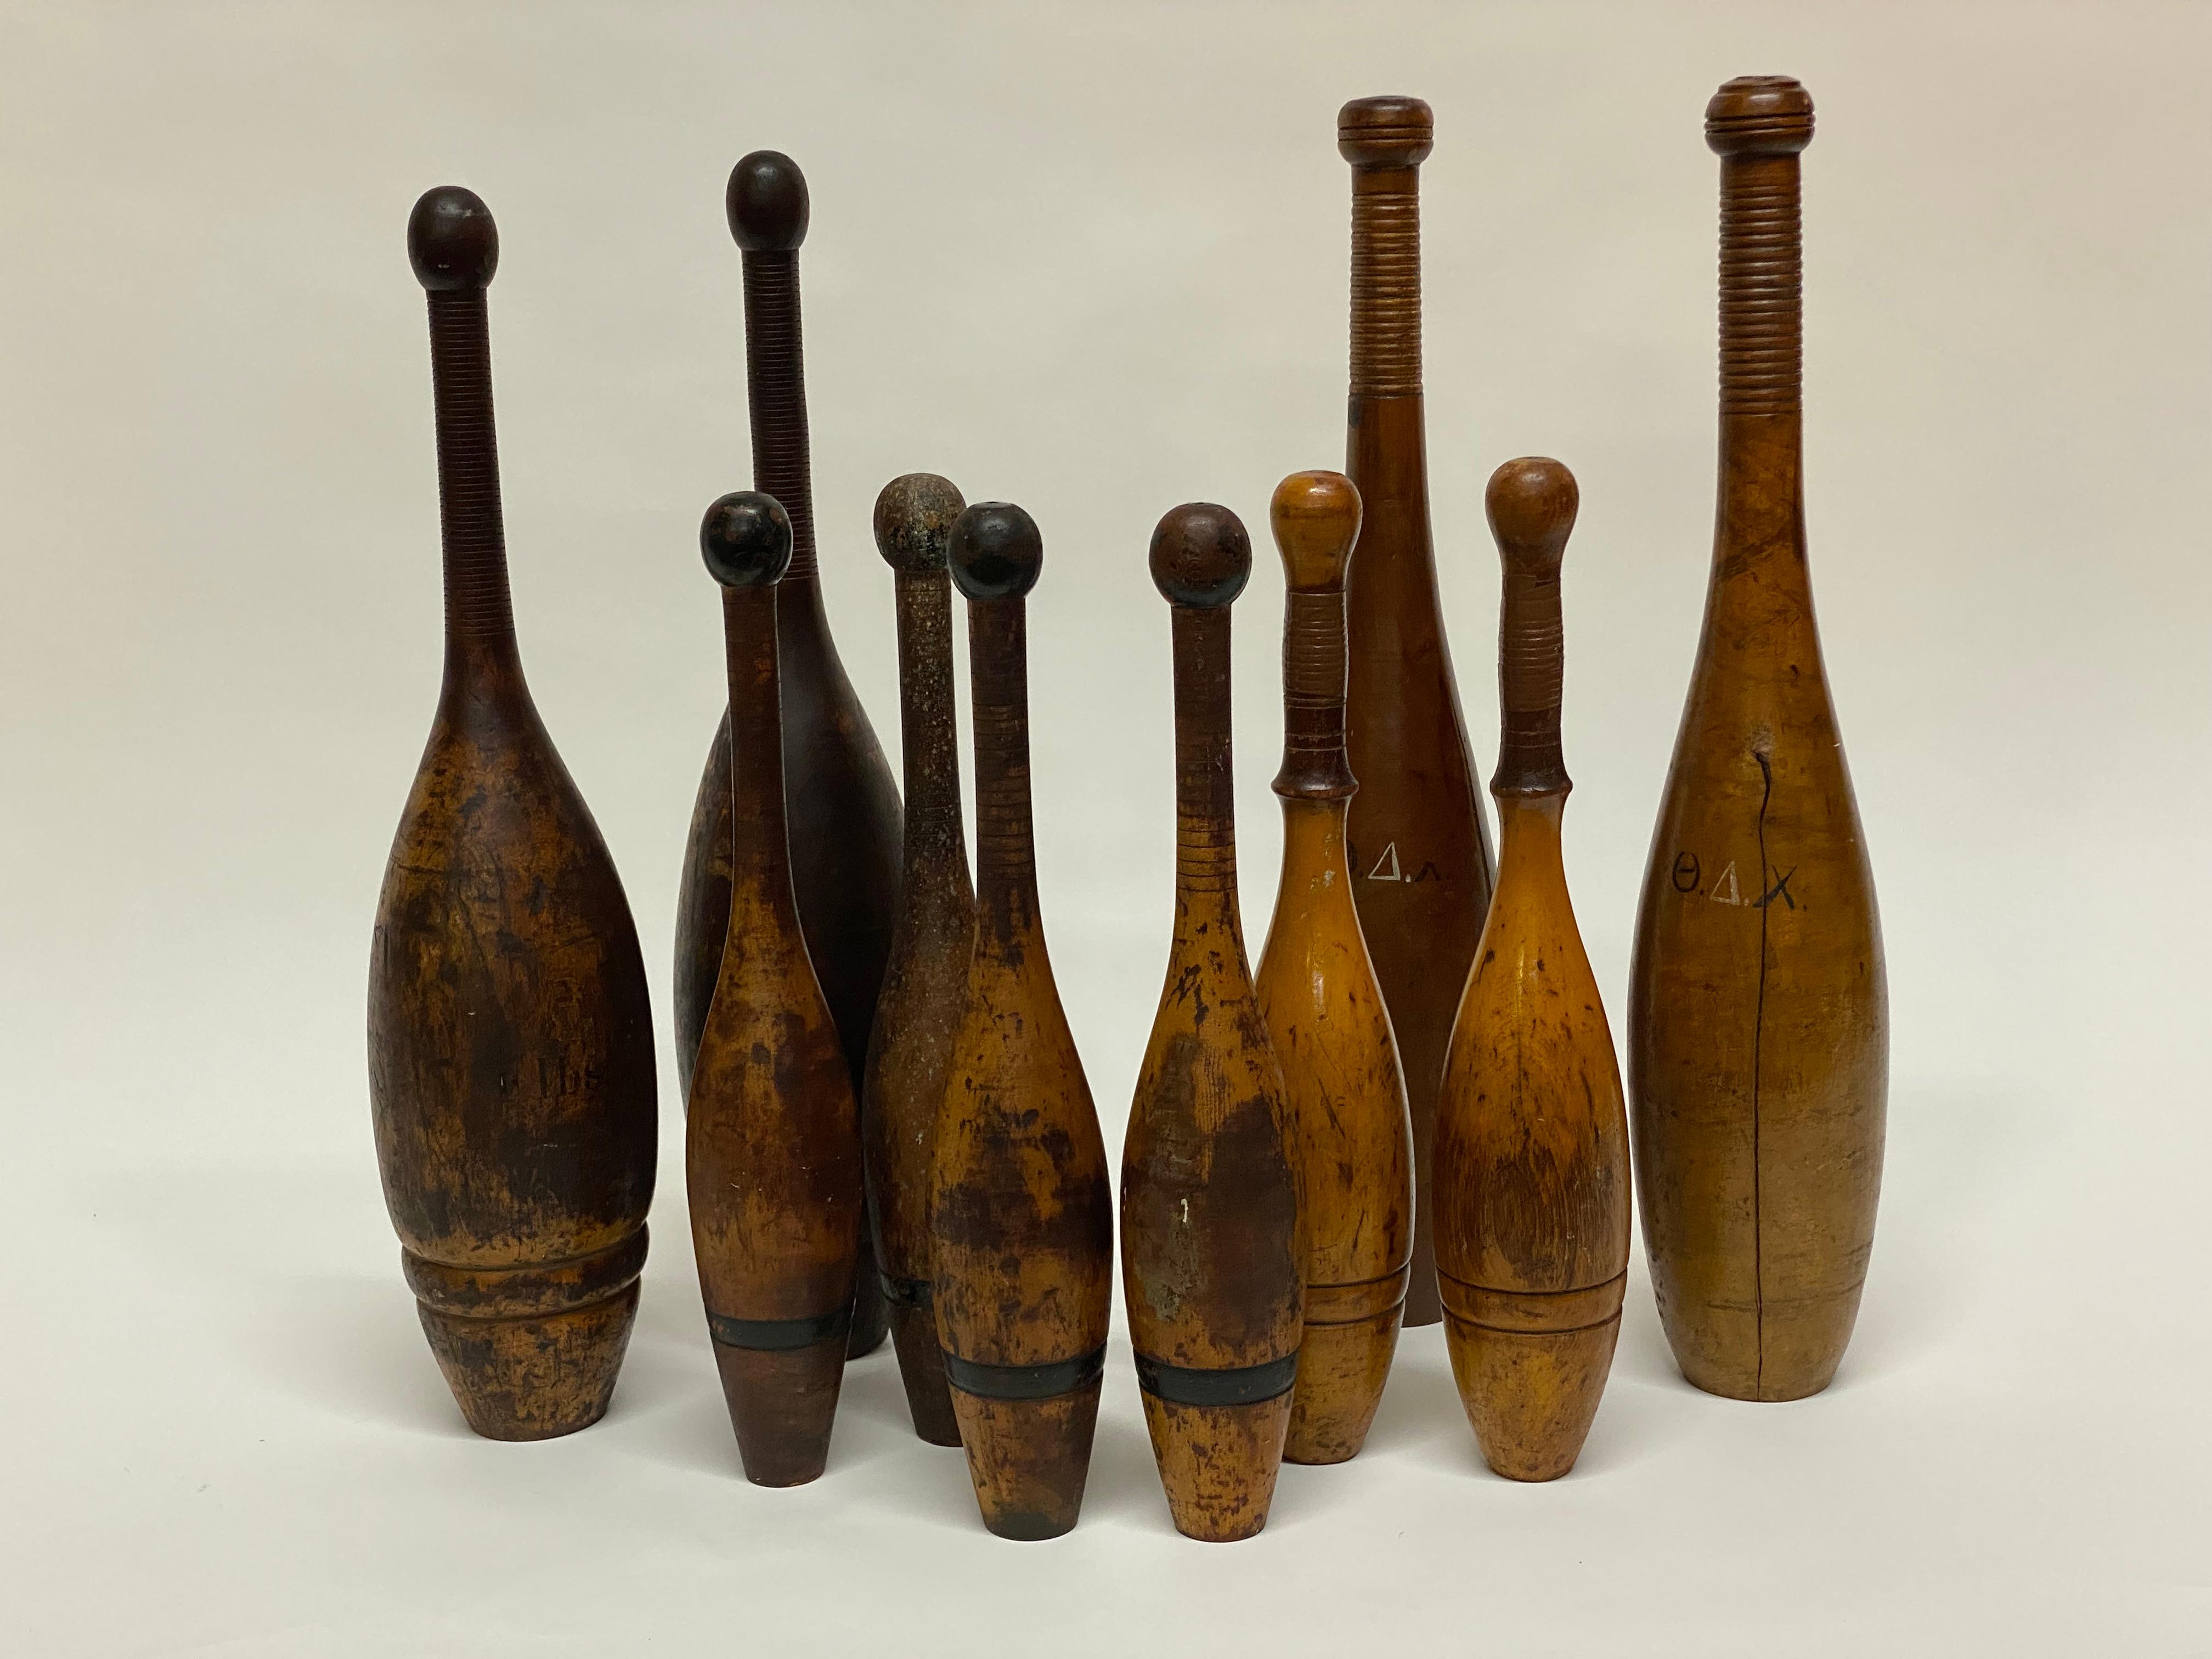 A collection of five pairs of nicely turned Indian Clubs. Ten clubs in total. The heaviest examples are 4 pound and the lighter ones around two pounds. The only set that is signed are four pounds by S.D. Kehoe, Maker, New York. One other set is